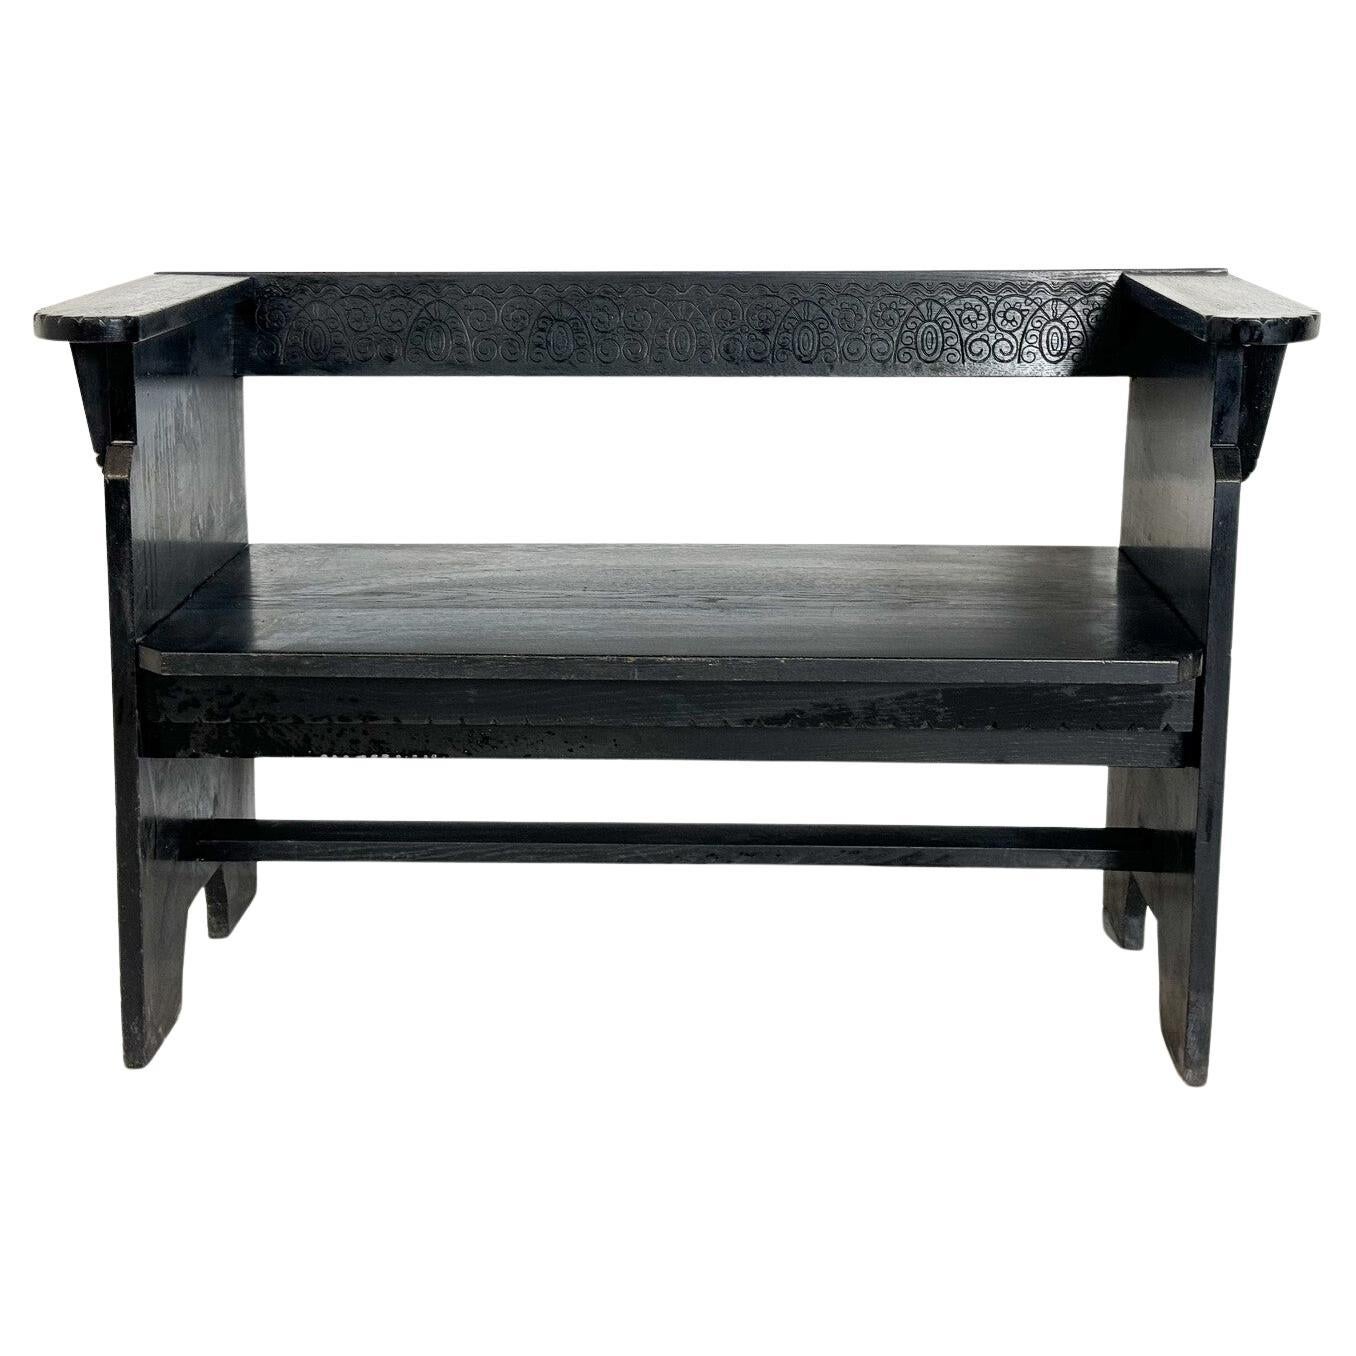 Hungarian Wooden Bench For Sale